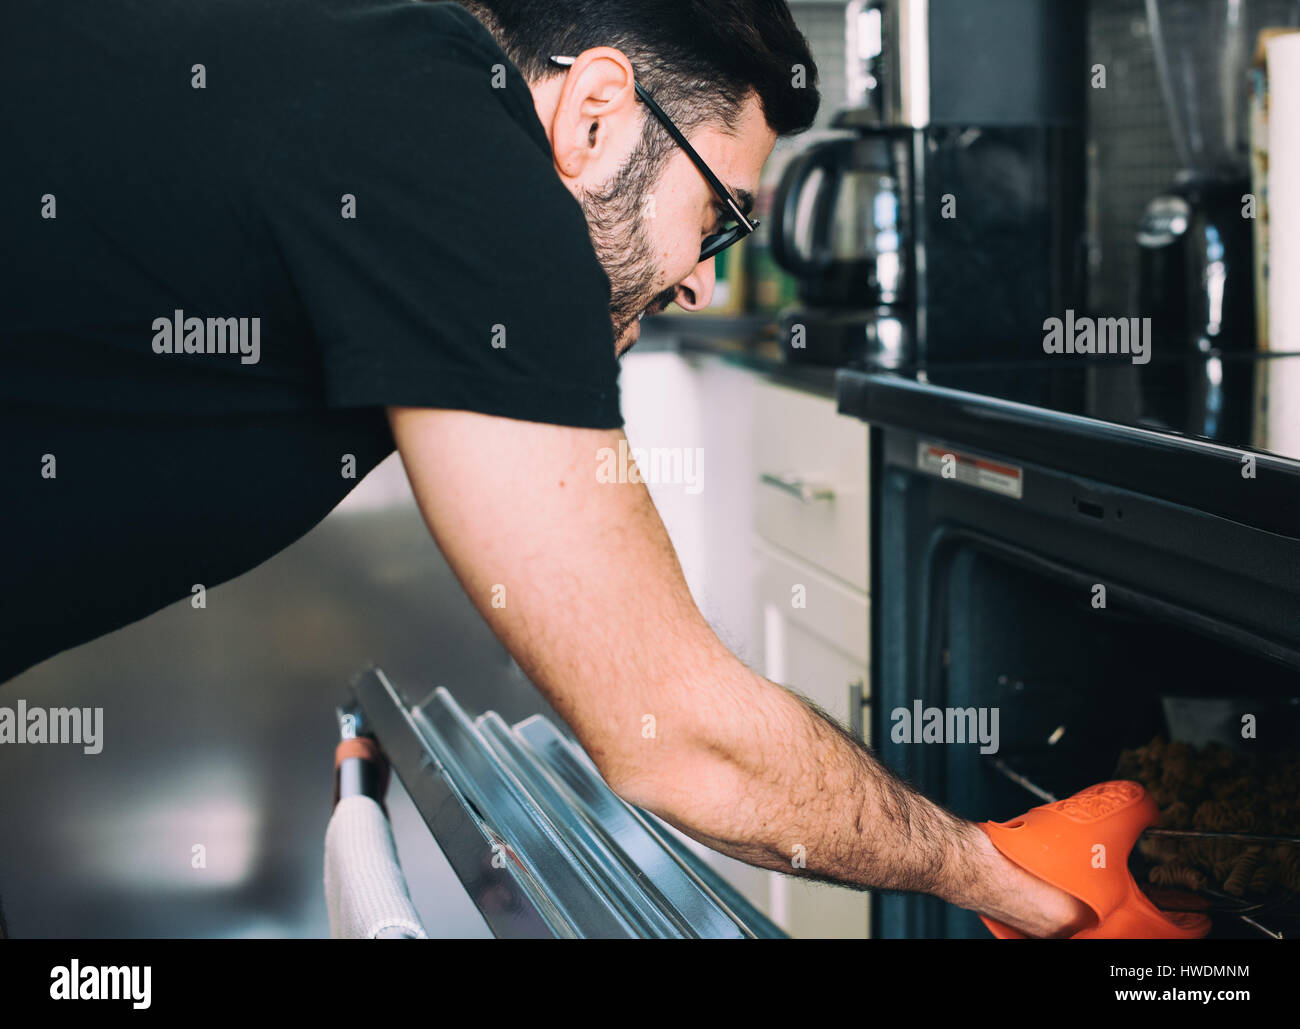 Man removing food from oven Stock Photo